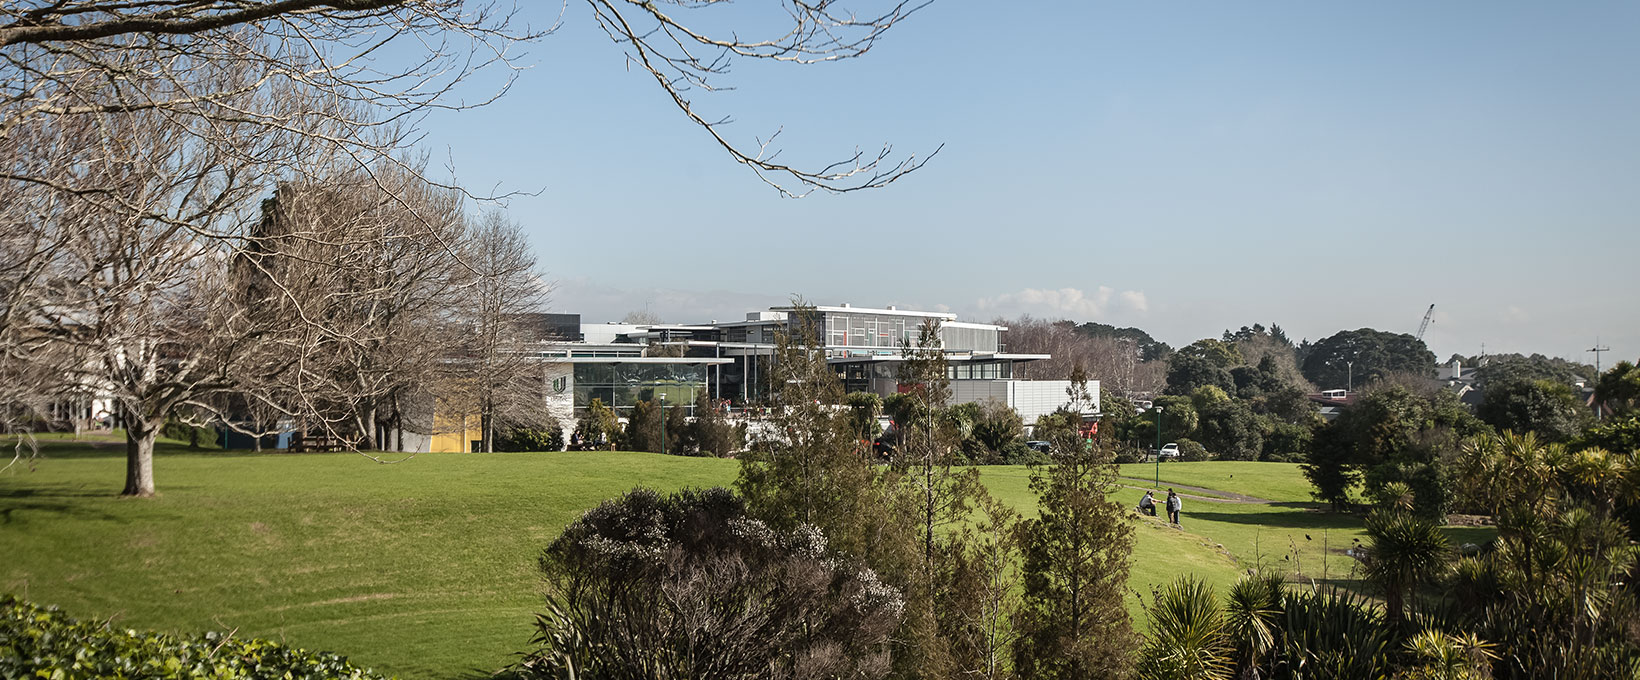 Unitec Mt Albert campus showing large green space and trees in front of buildings